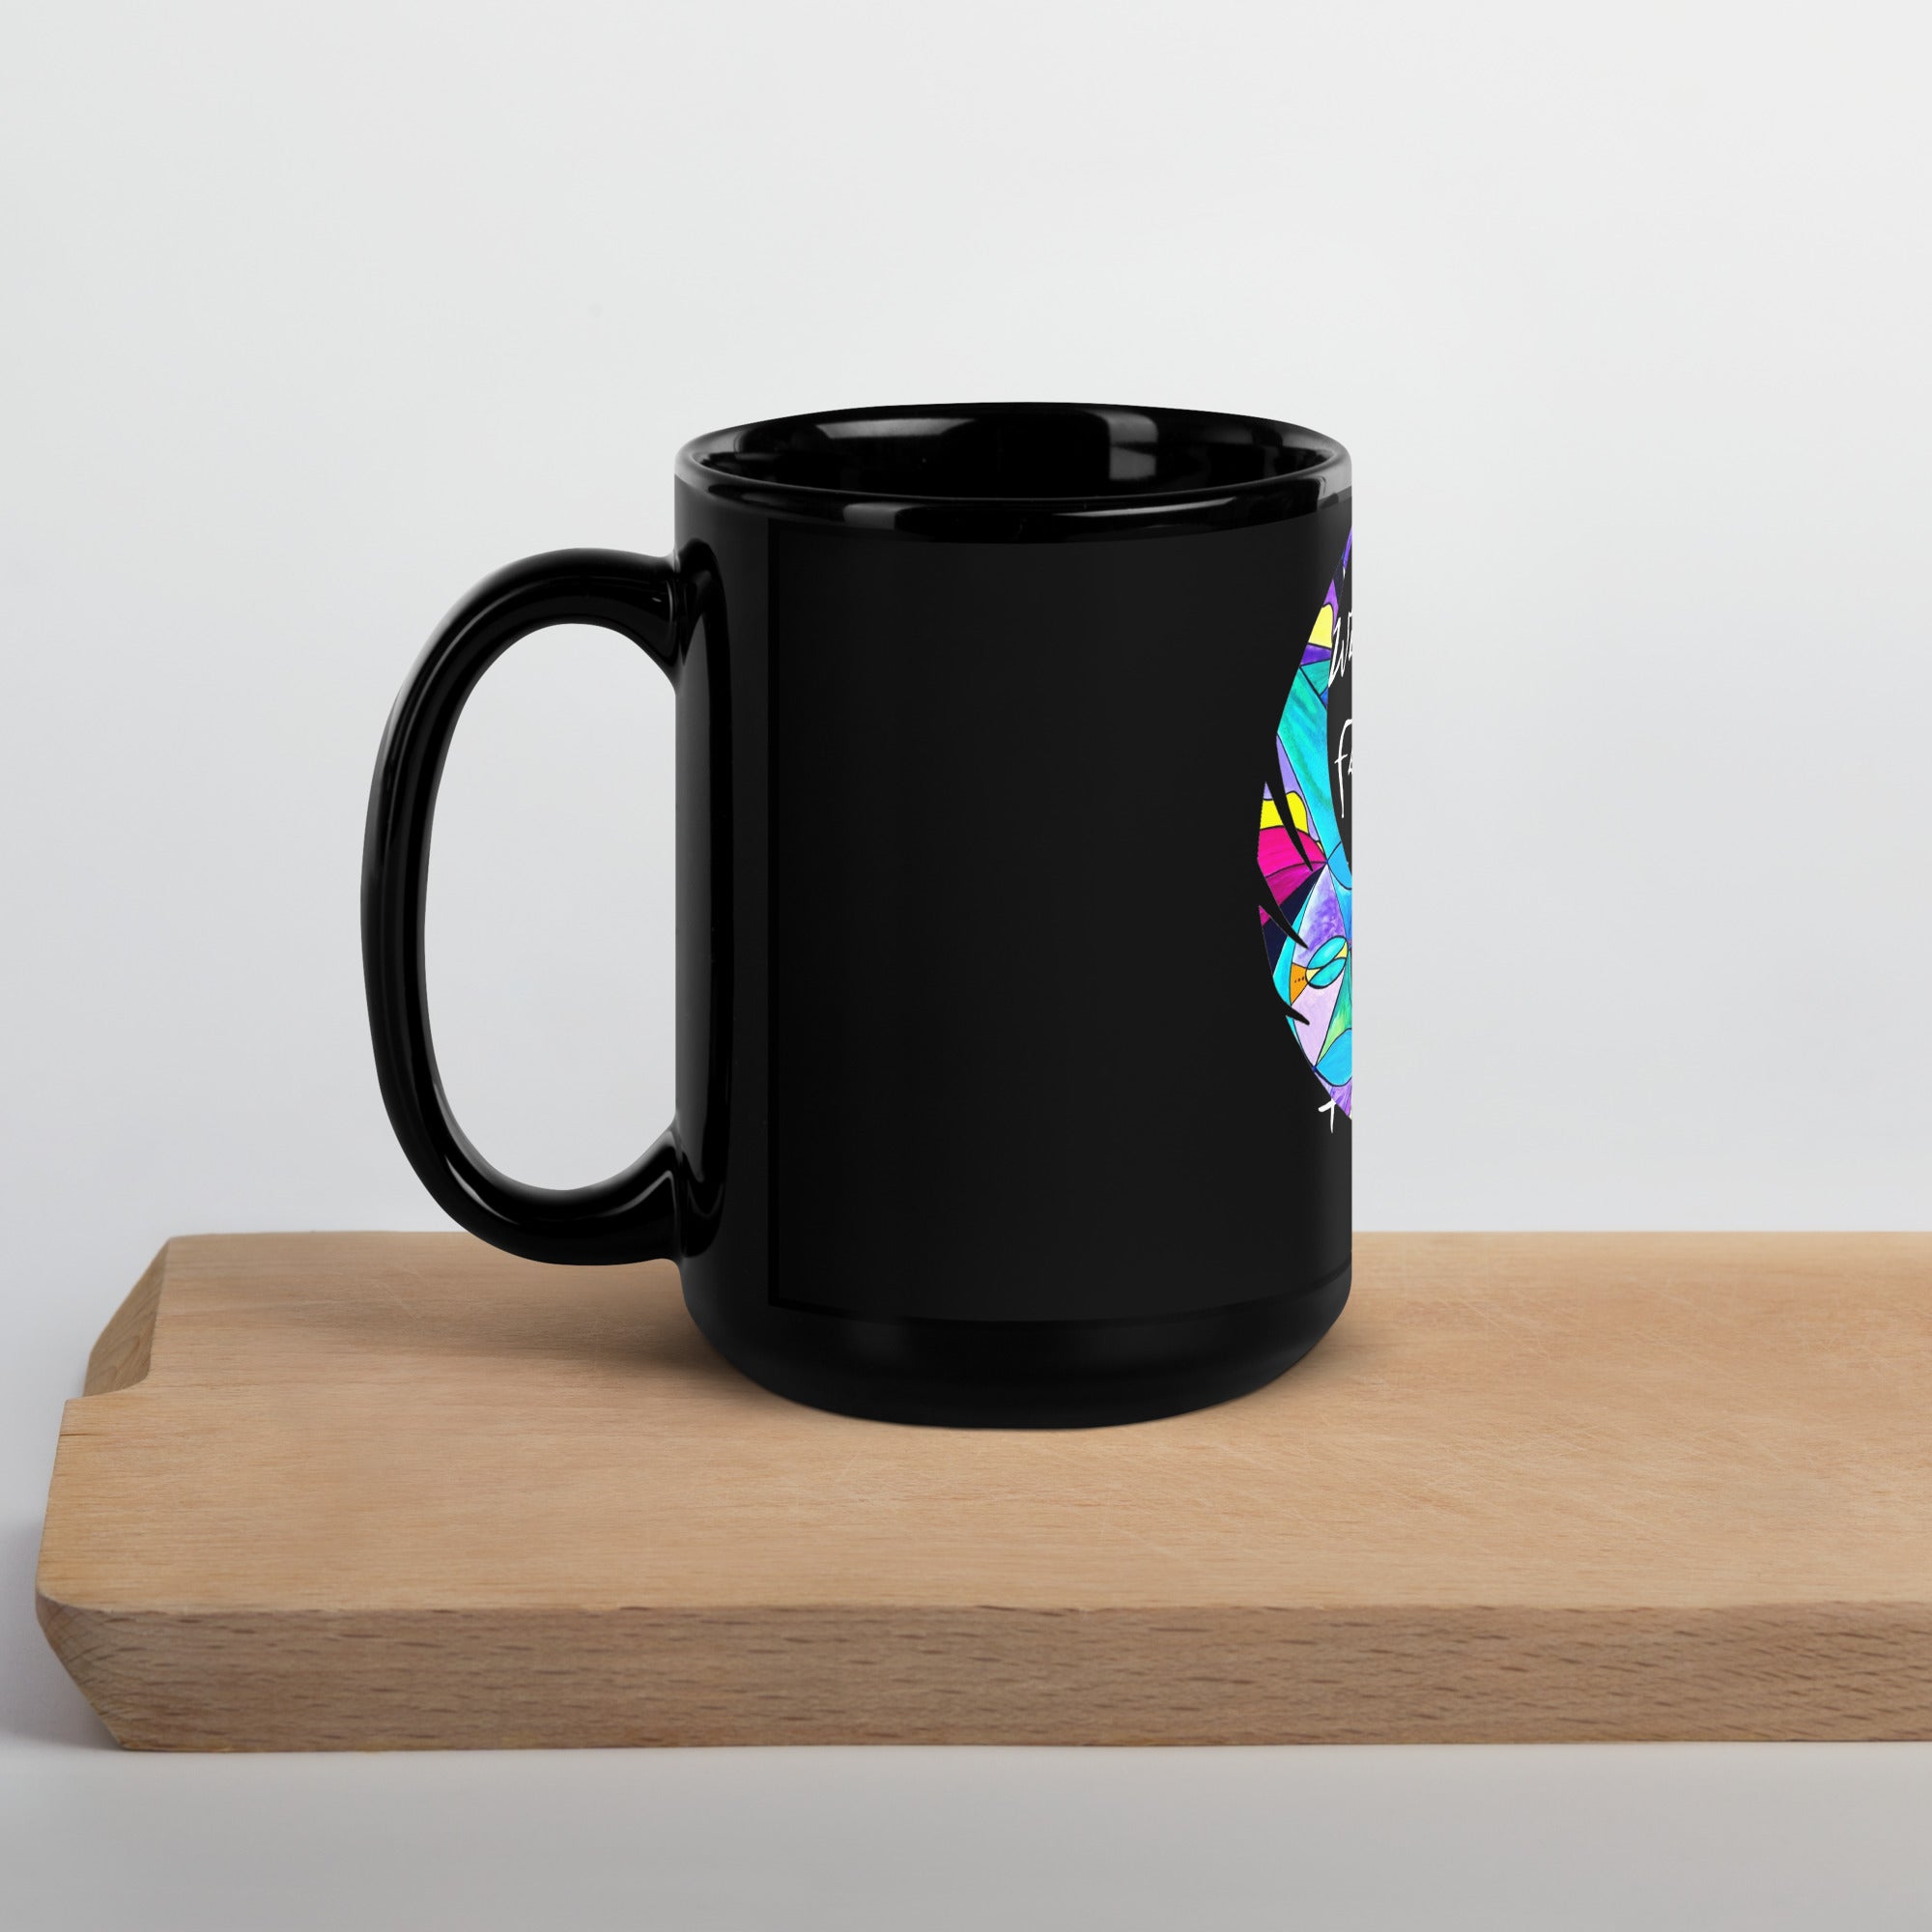 make-your-order-official-of-fear-the-unknown-quote-black-glossy-mug-fashion_2.jpg